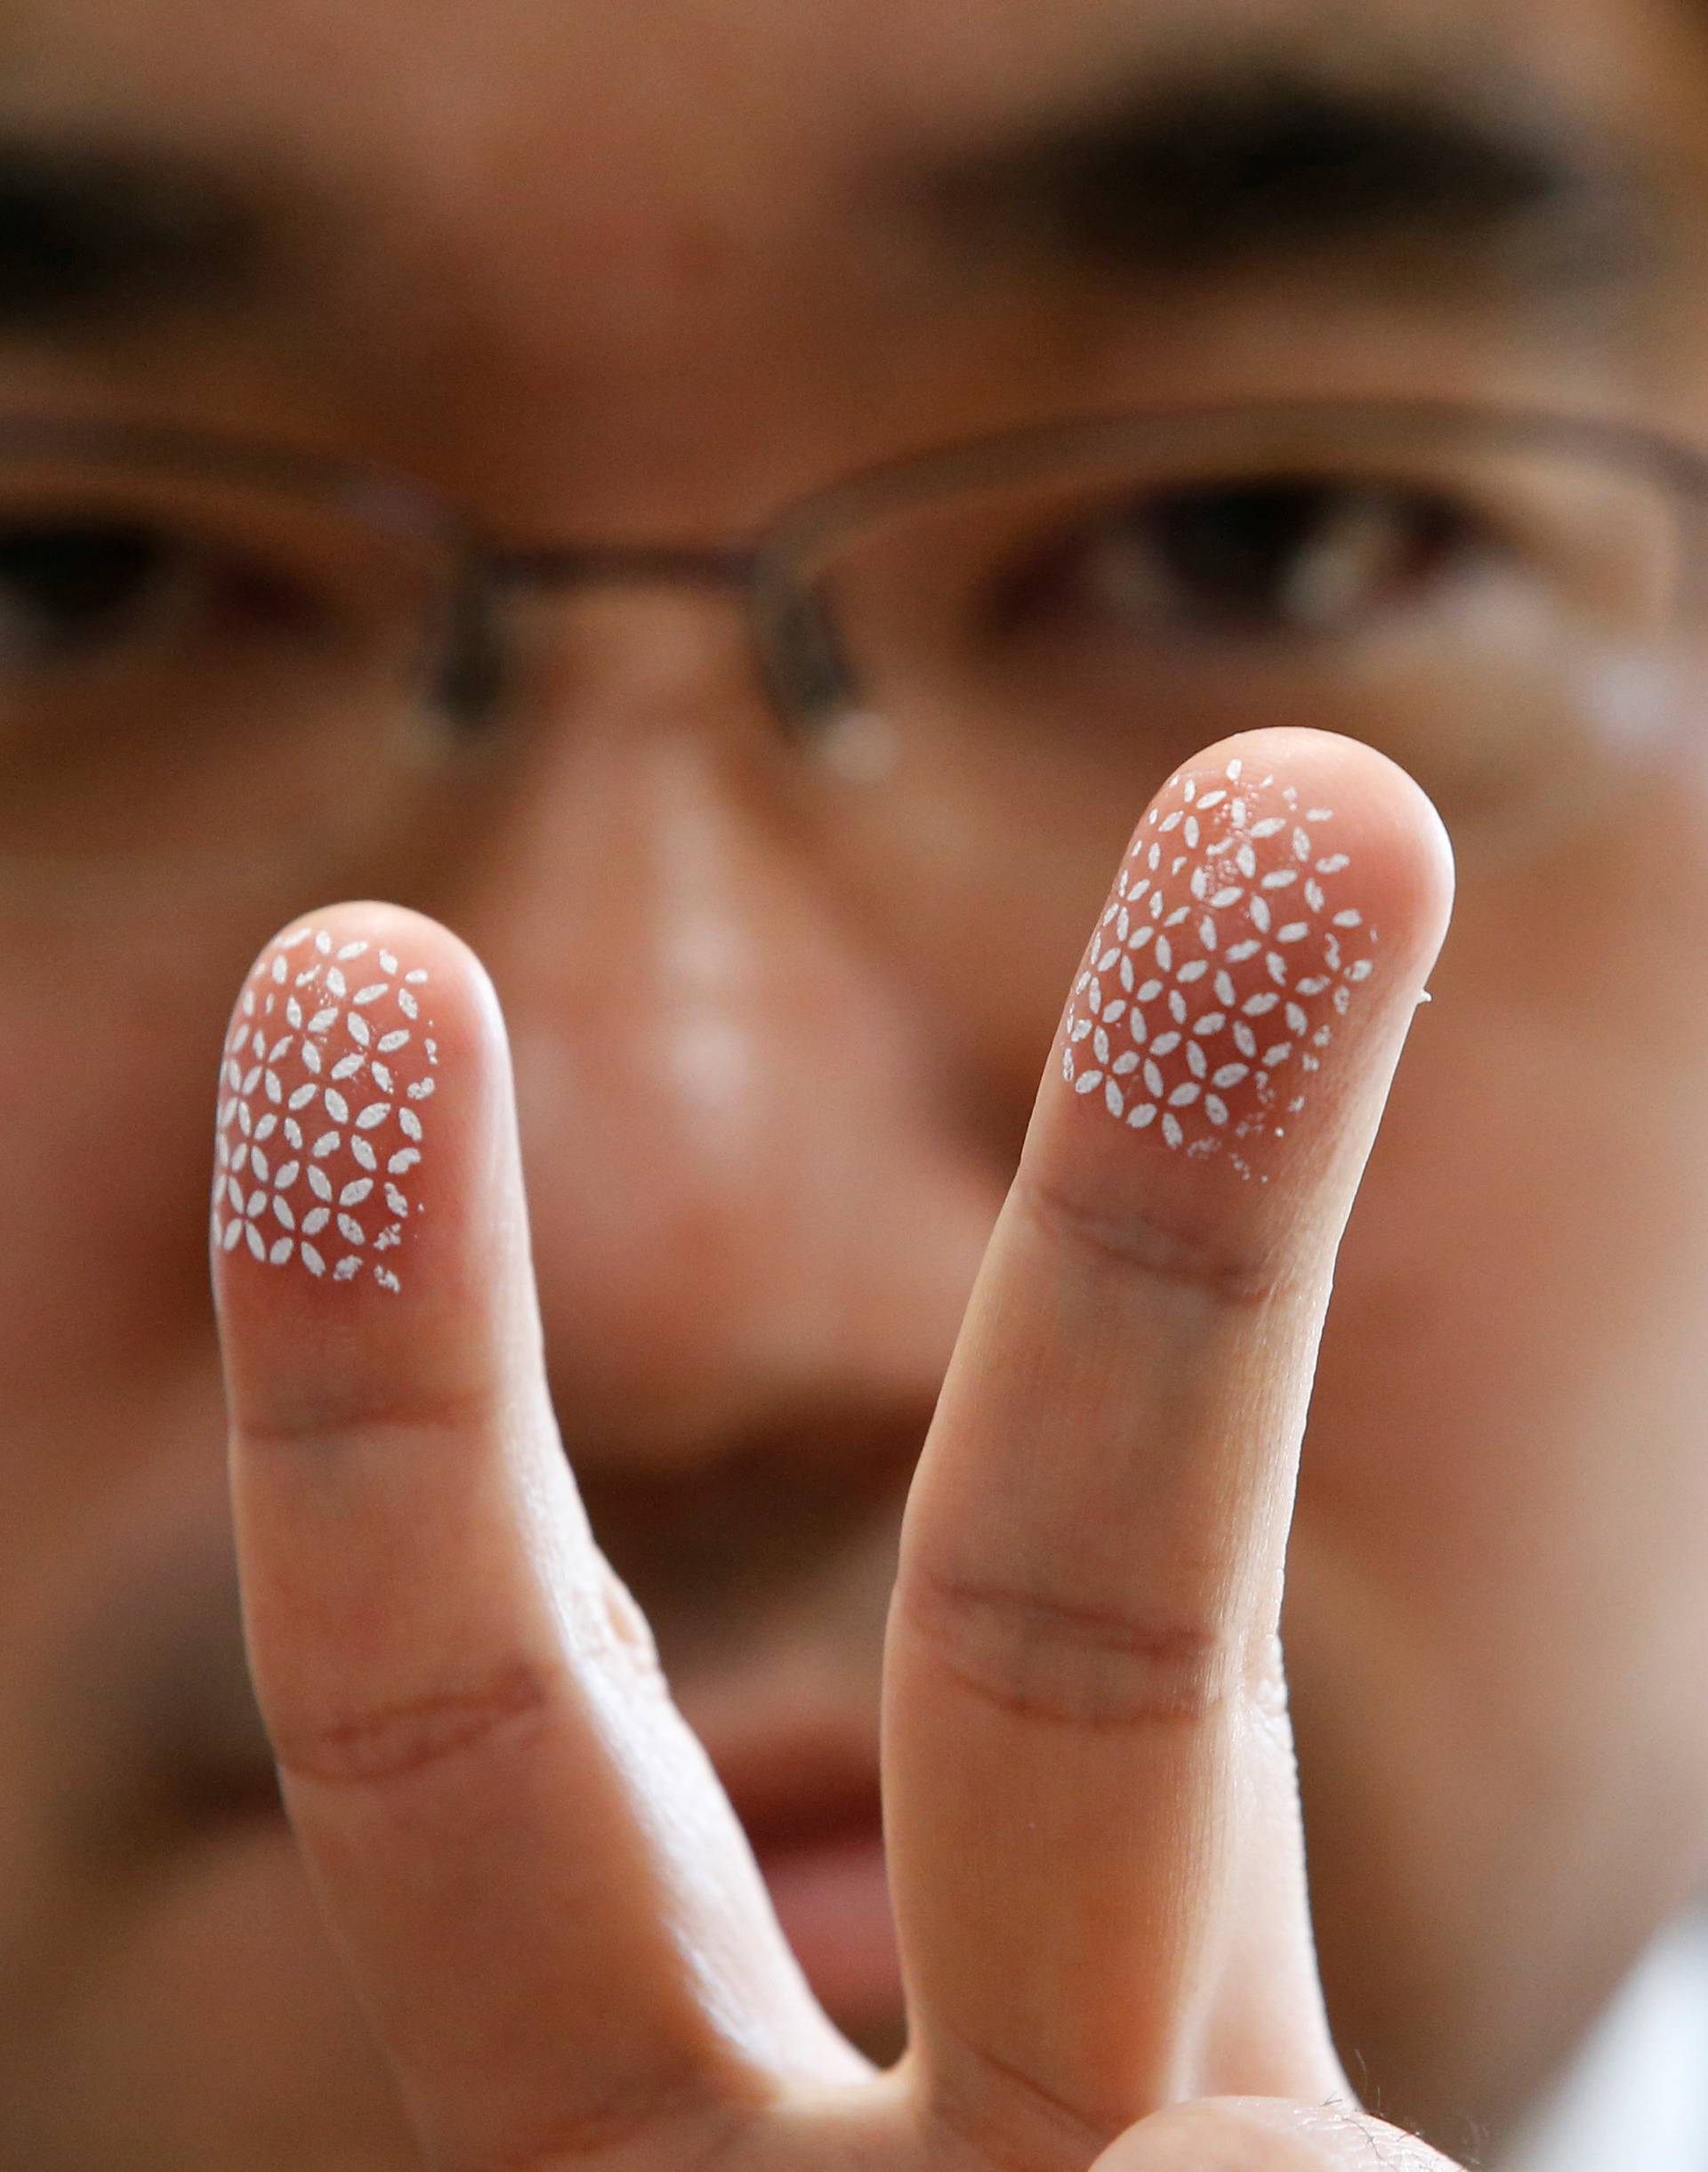 Echizen, a professor at Japan's National Institute of Informatics, poses to a photographer as he gestures with his fingers covered with a home-made biometric jammer during a demonstration of his experiment for Reuters in Tokyo